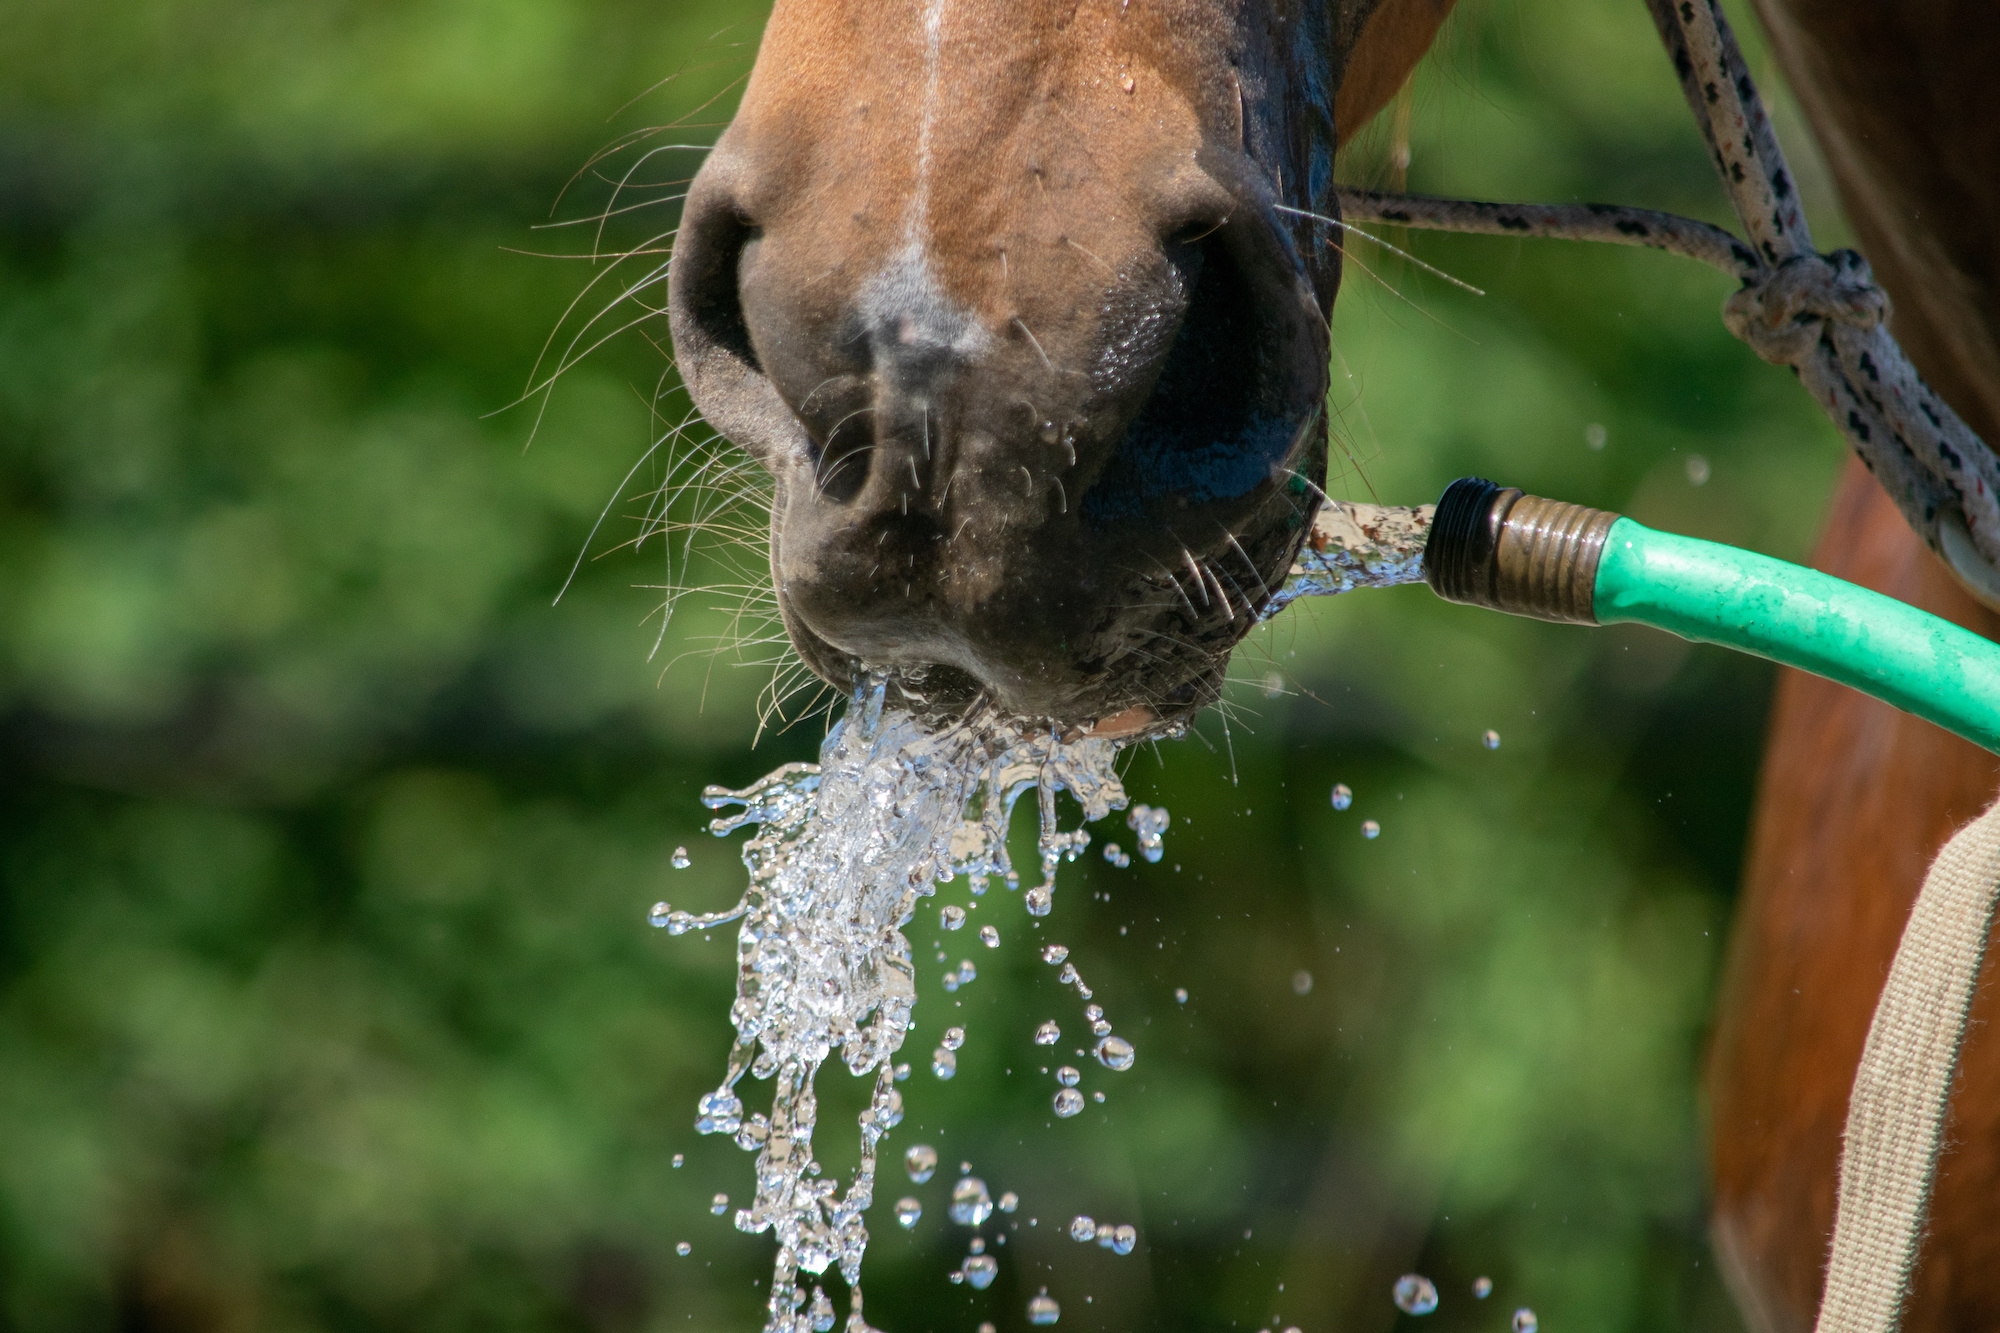 horse drinking water from a hose